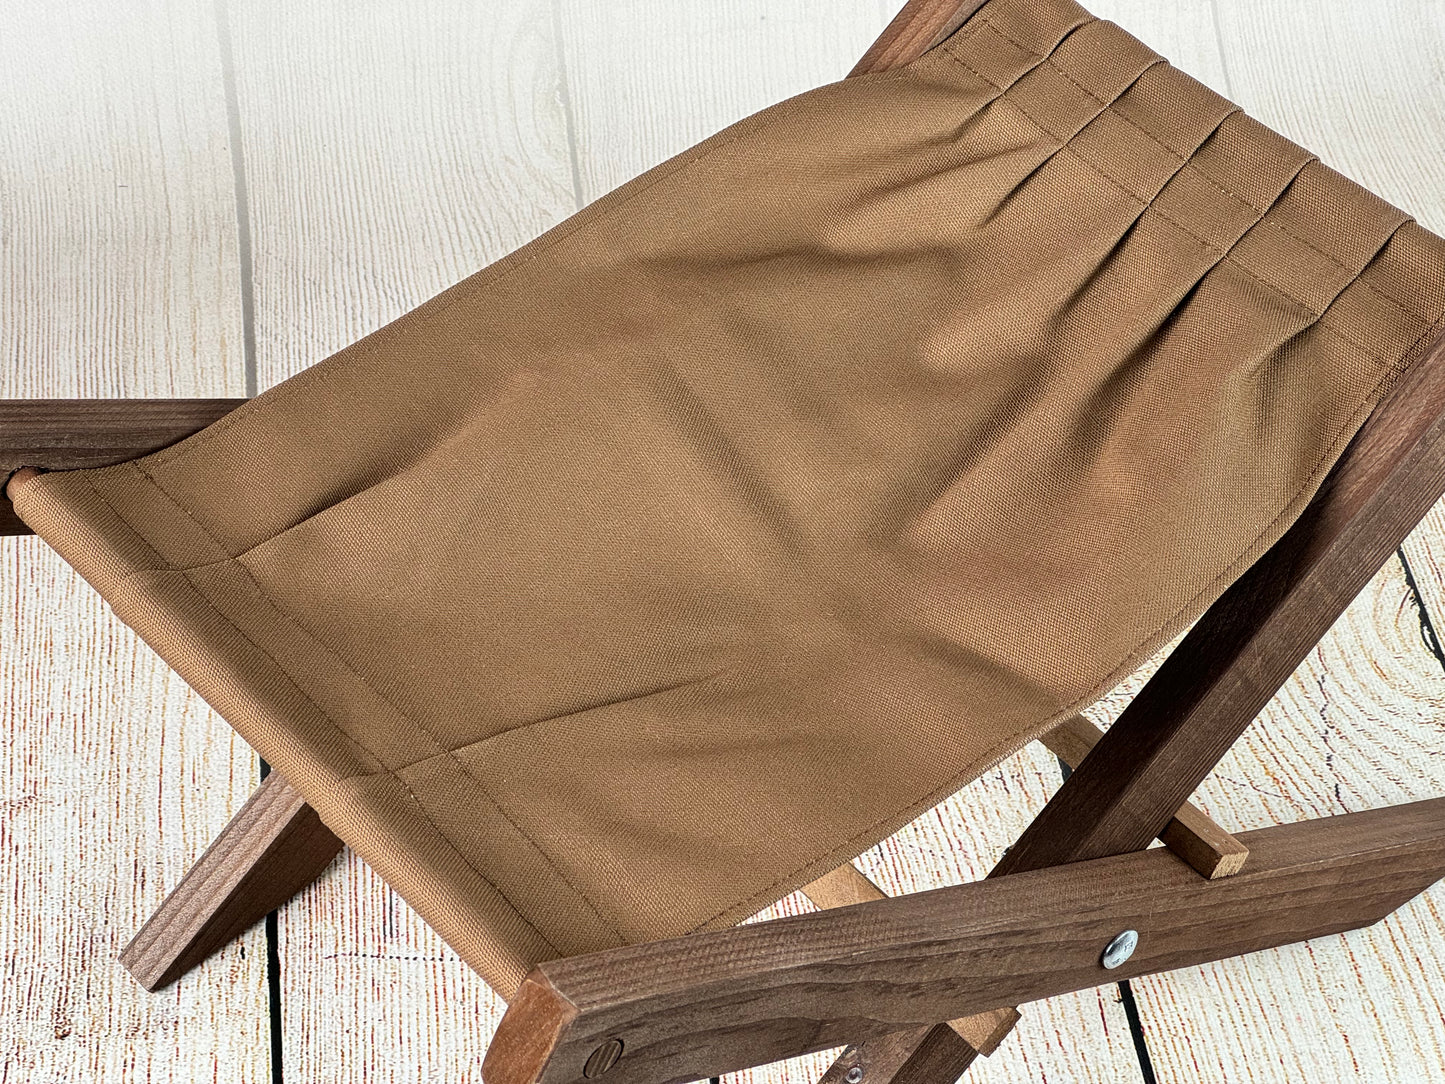 Rustic Deck Chair with Interchangeable Canvas - Brown (DISCONTINUED)